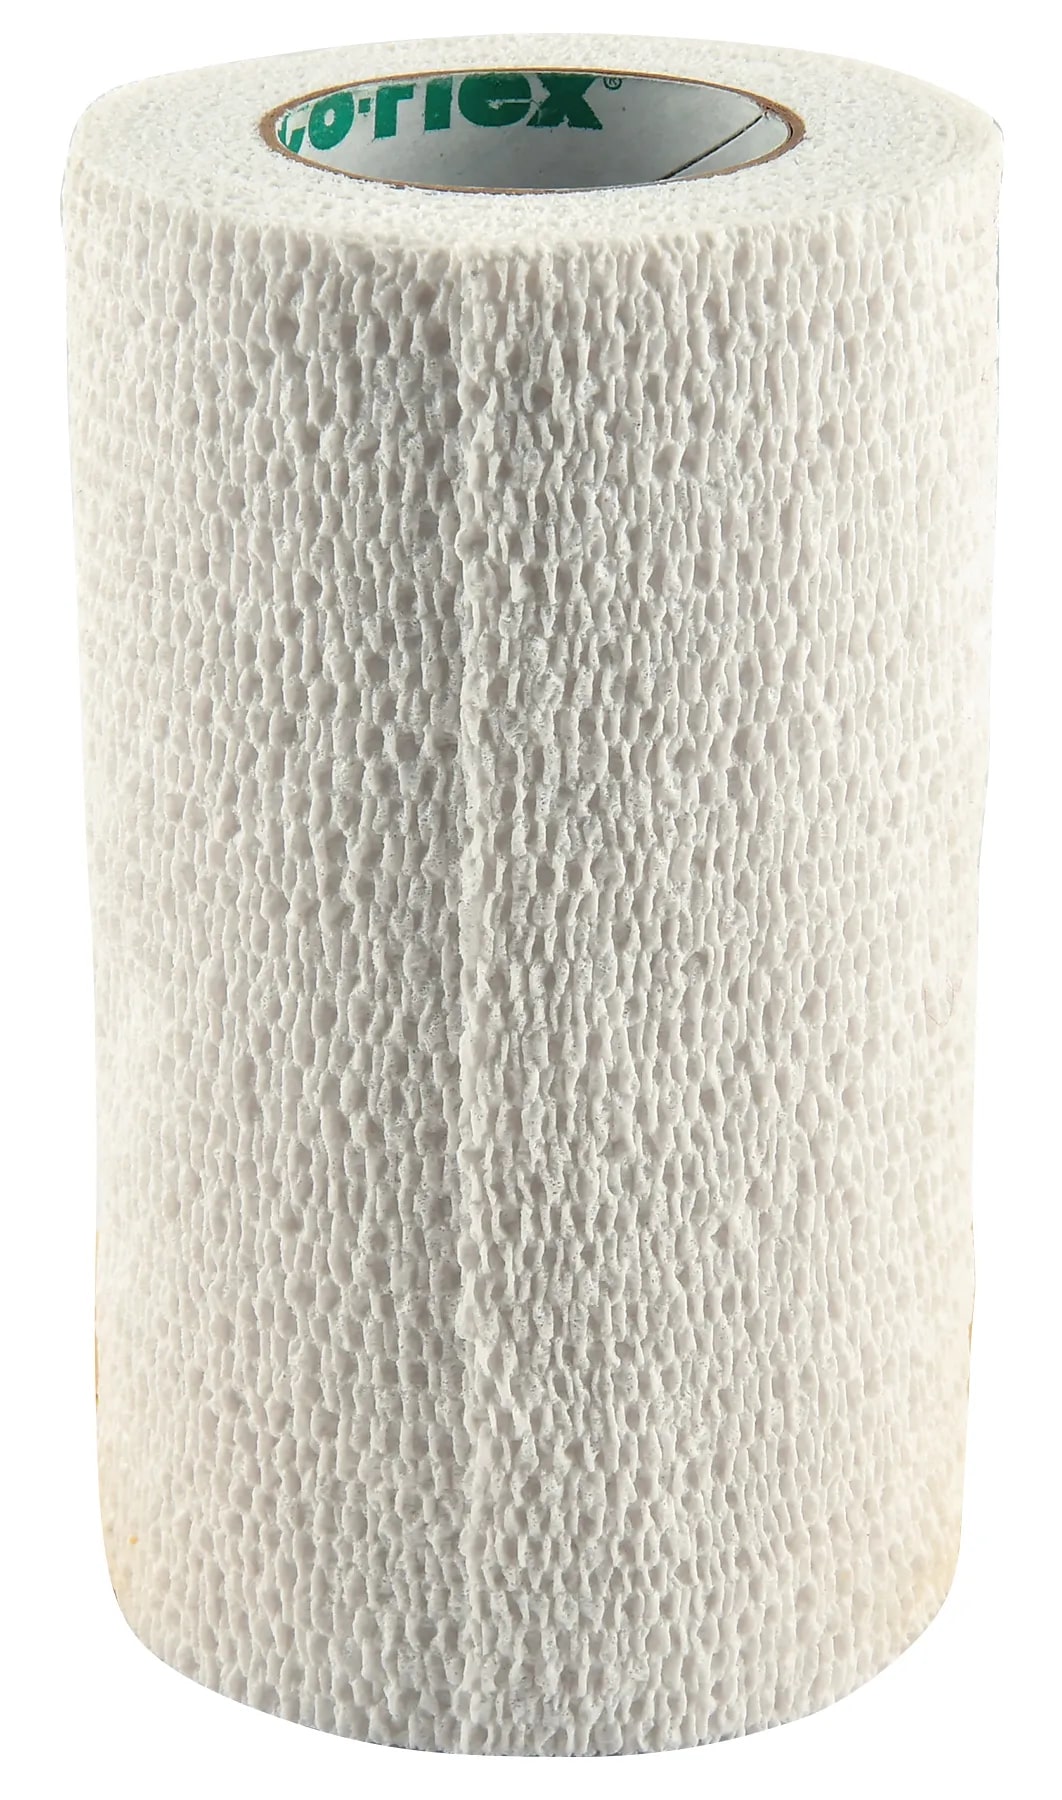 Co-Flex Adhesive Bandage by Andover